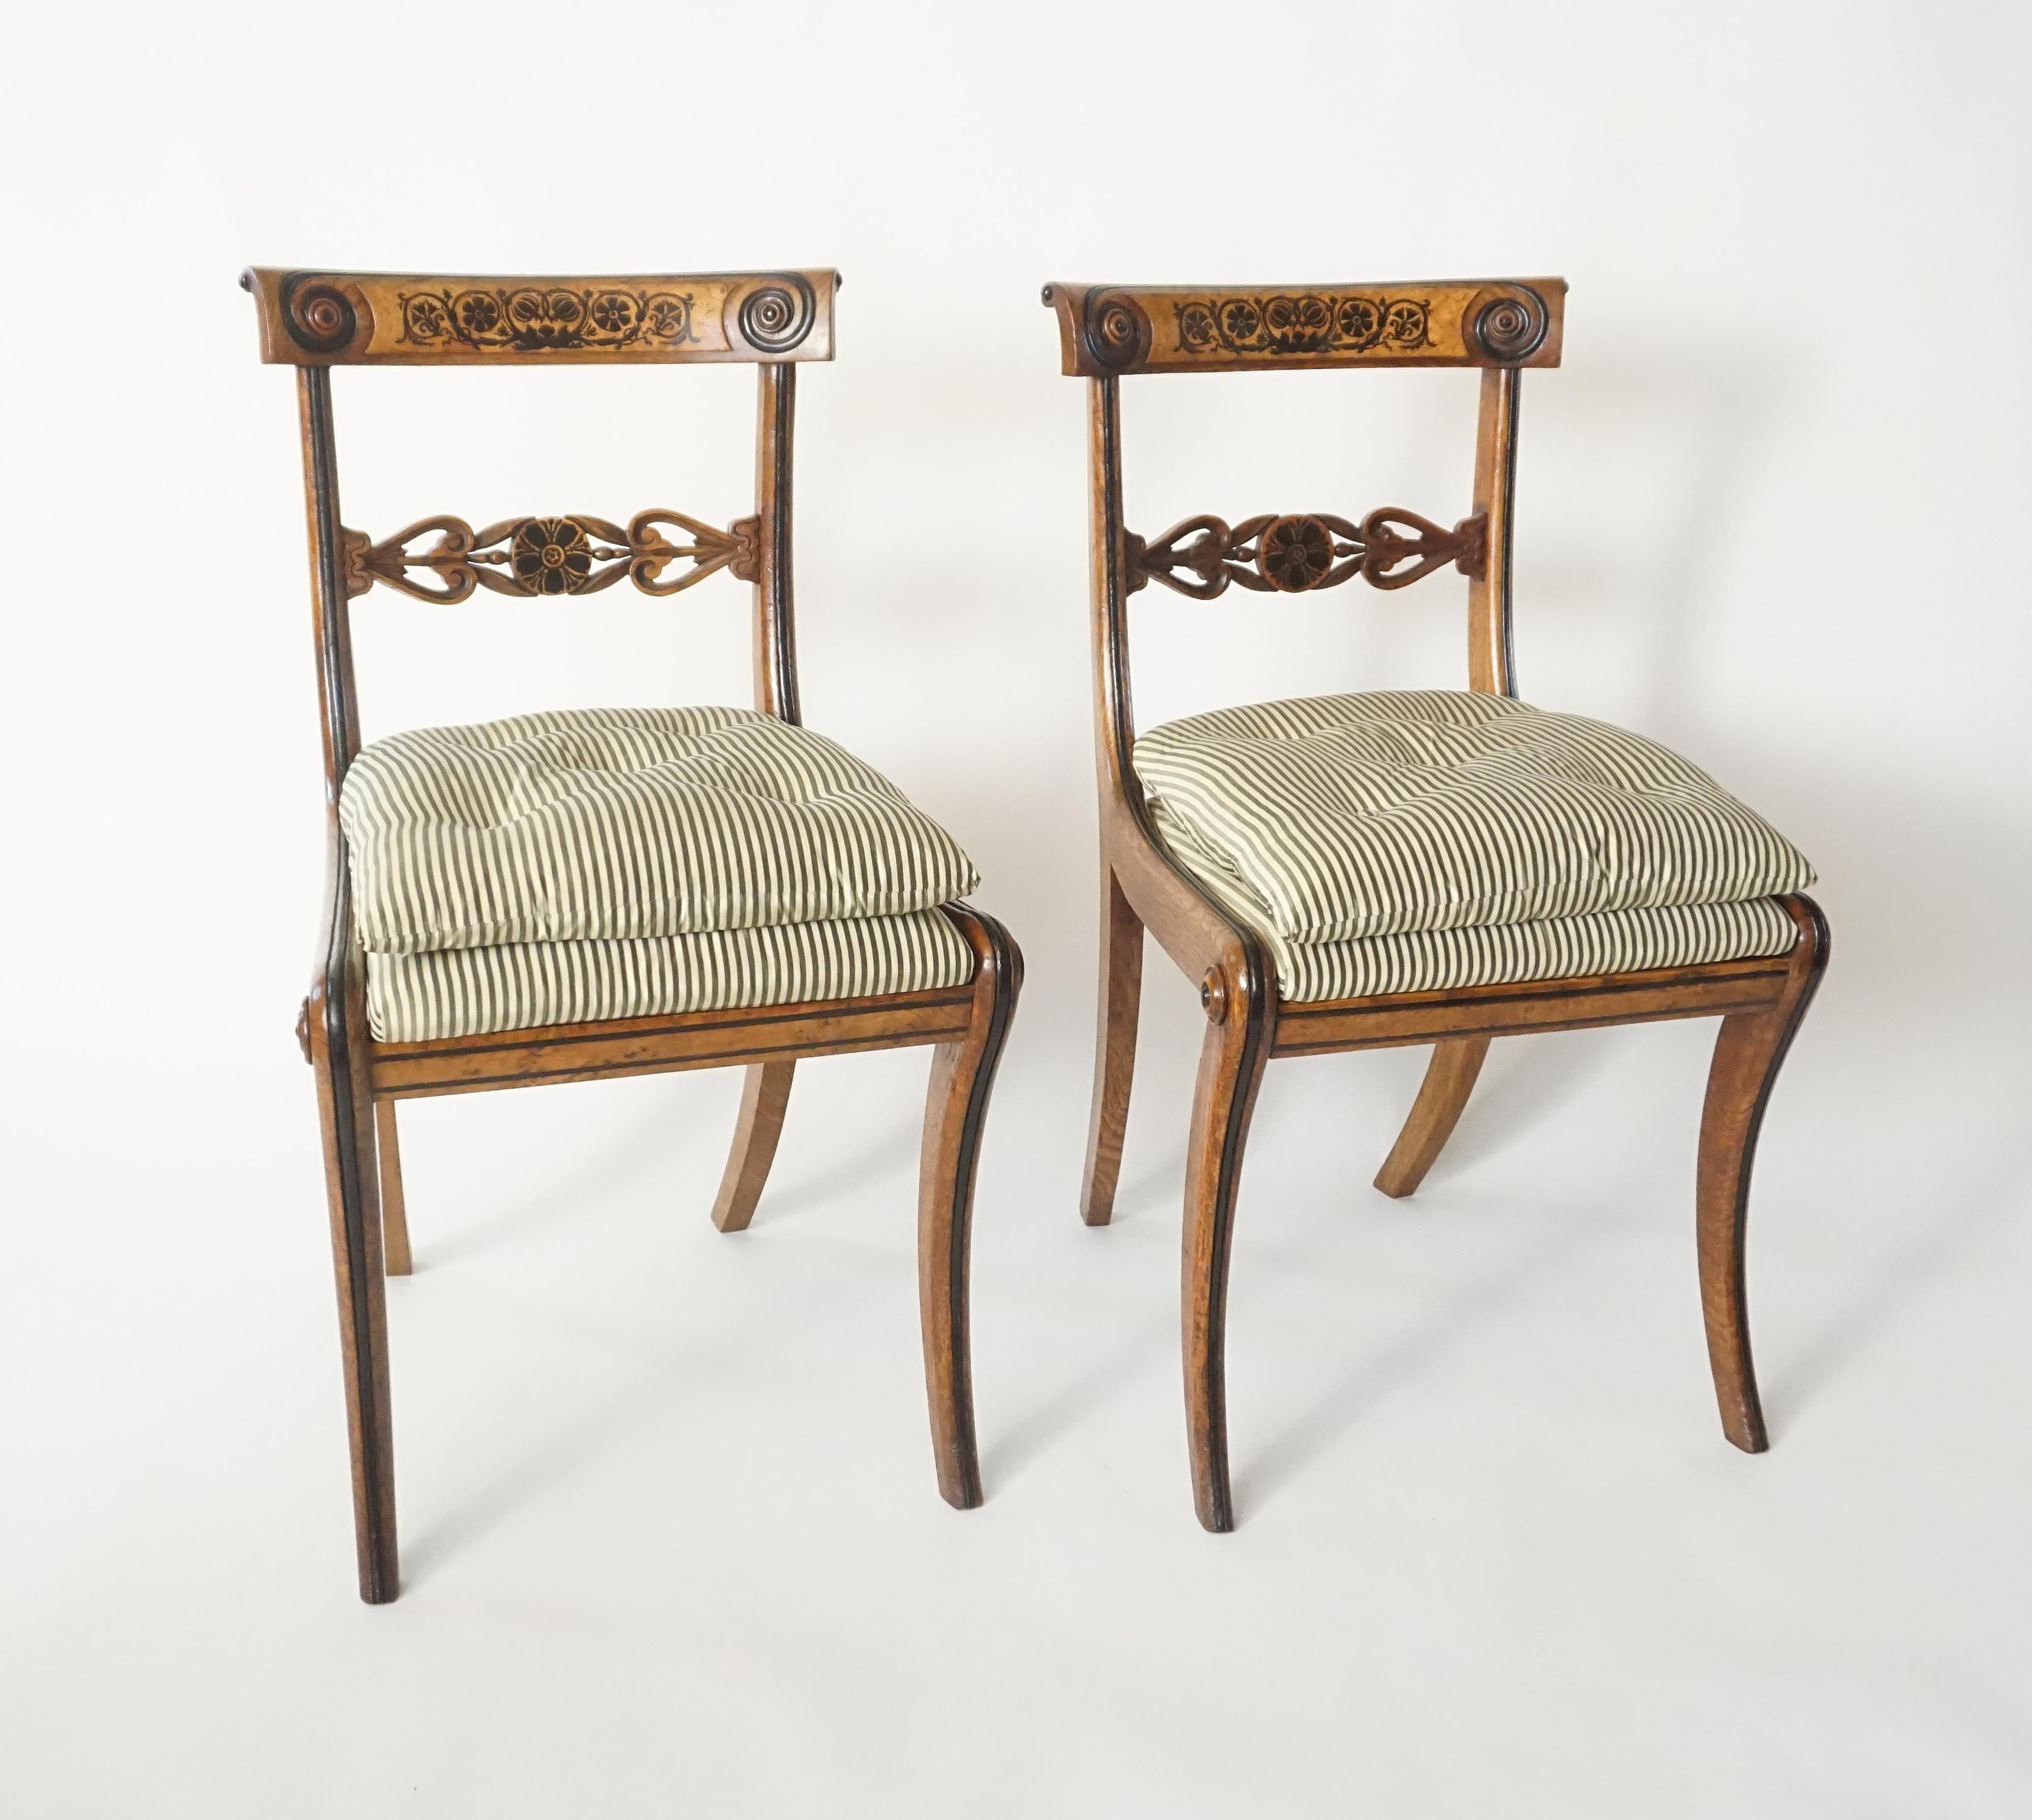 A rare and important set of four side or dining chairs by famed and short-lived English Regency-period cabinet-maker and sculptor George Bullock (c. 1782 - 1818) of klismos form; the pollard oak frames having foliate inlays of ebony with burled